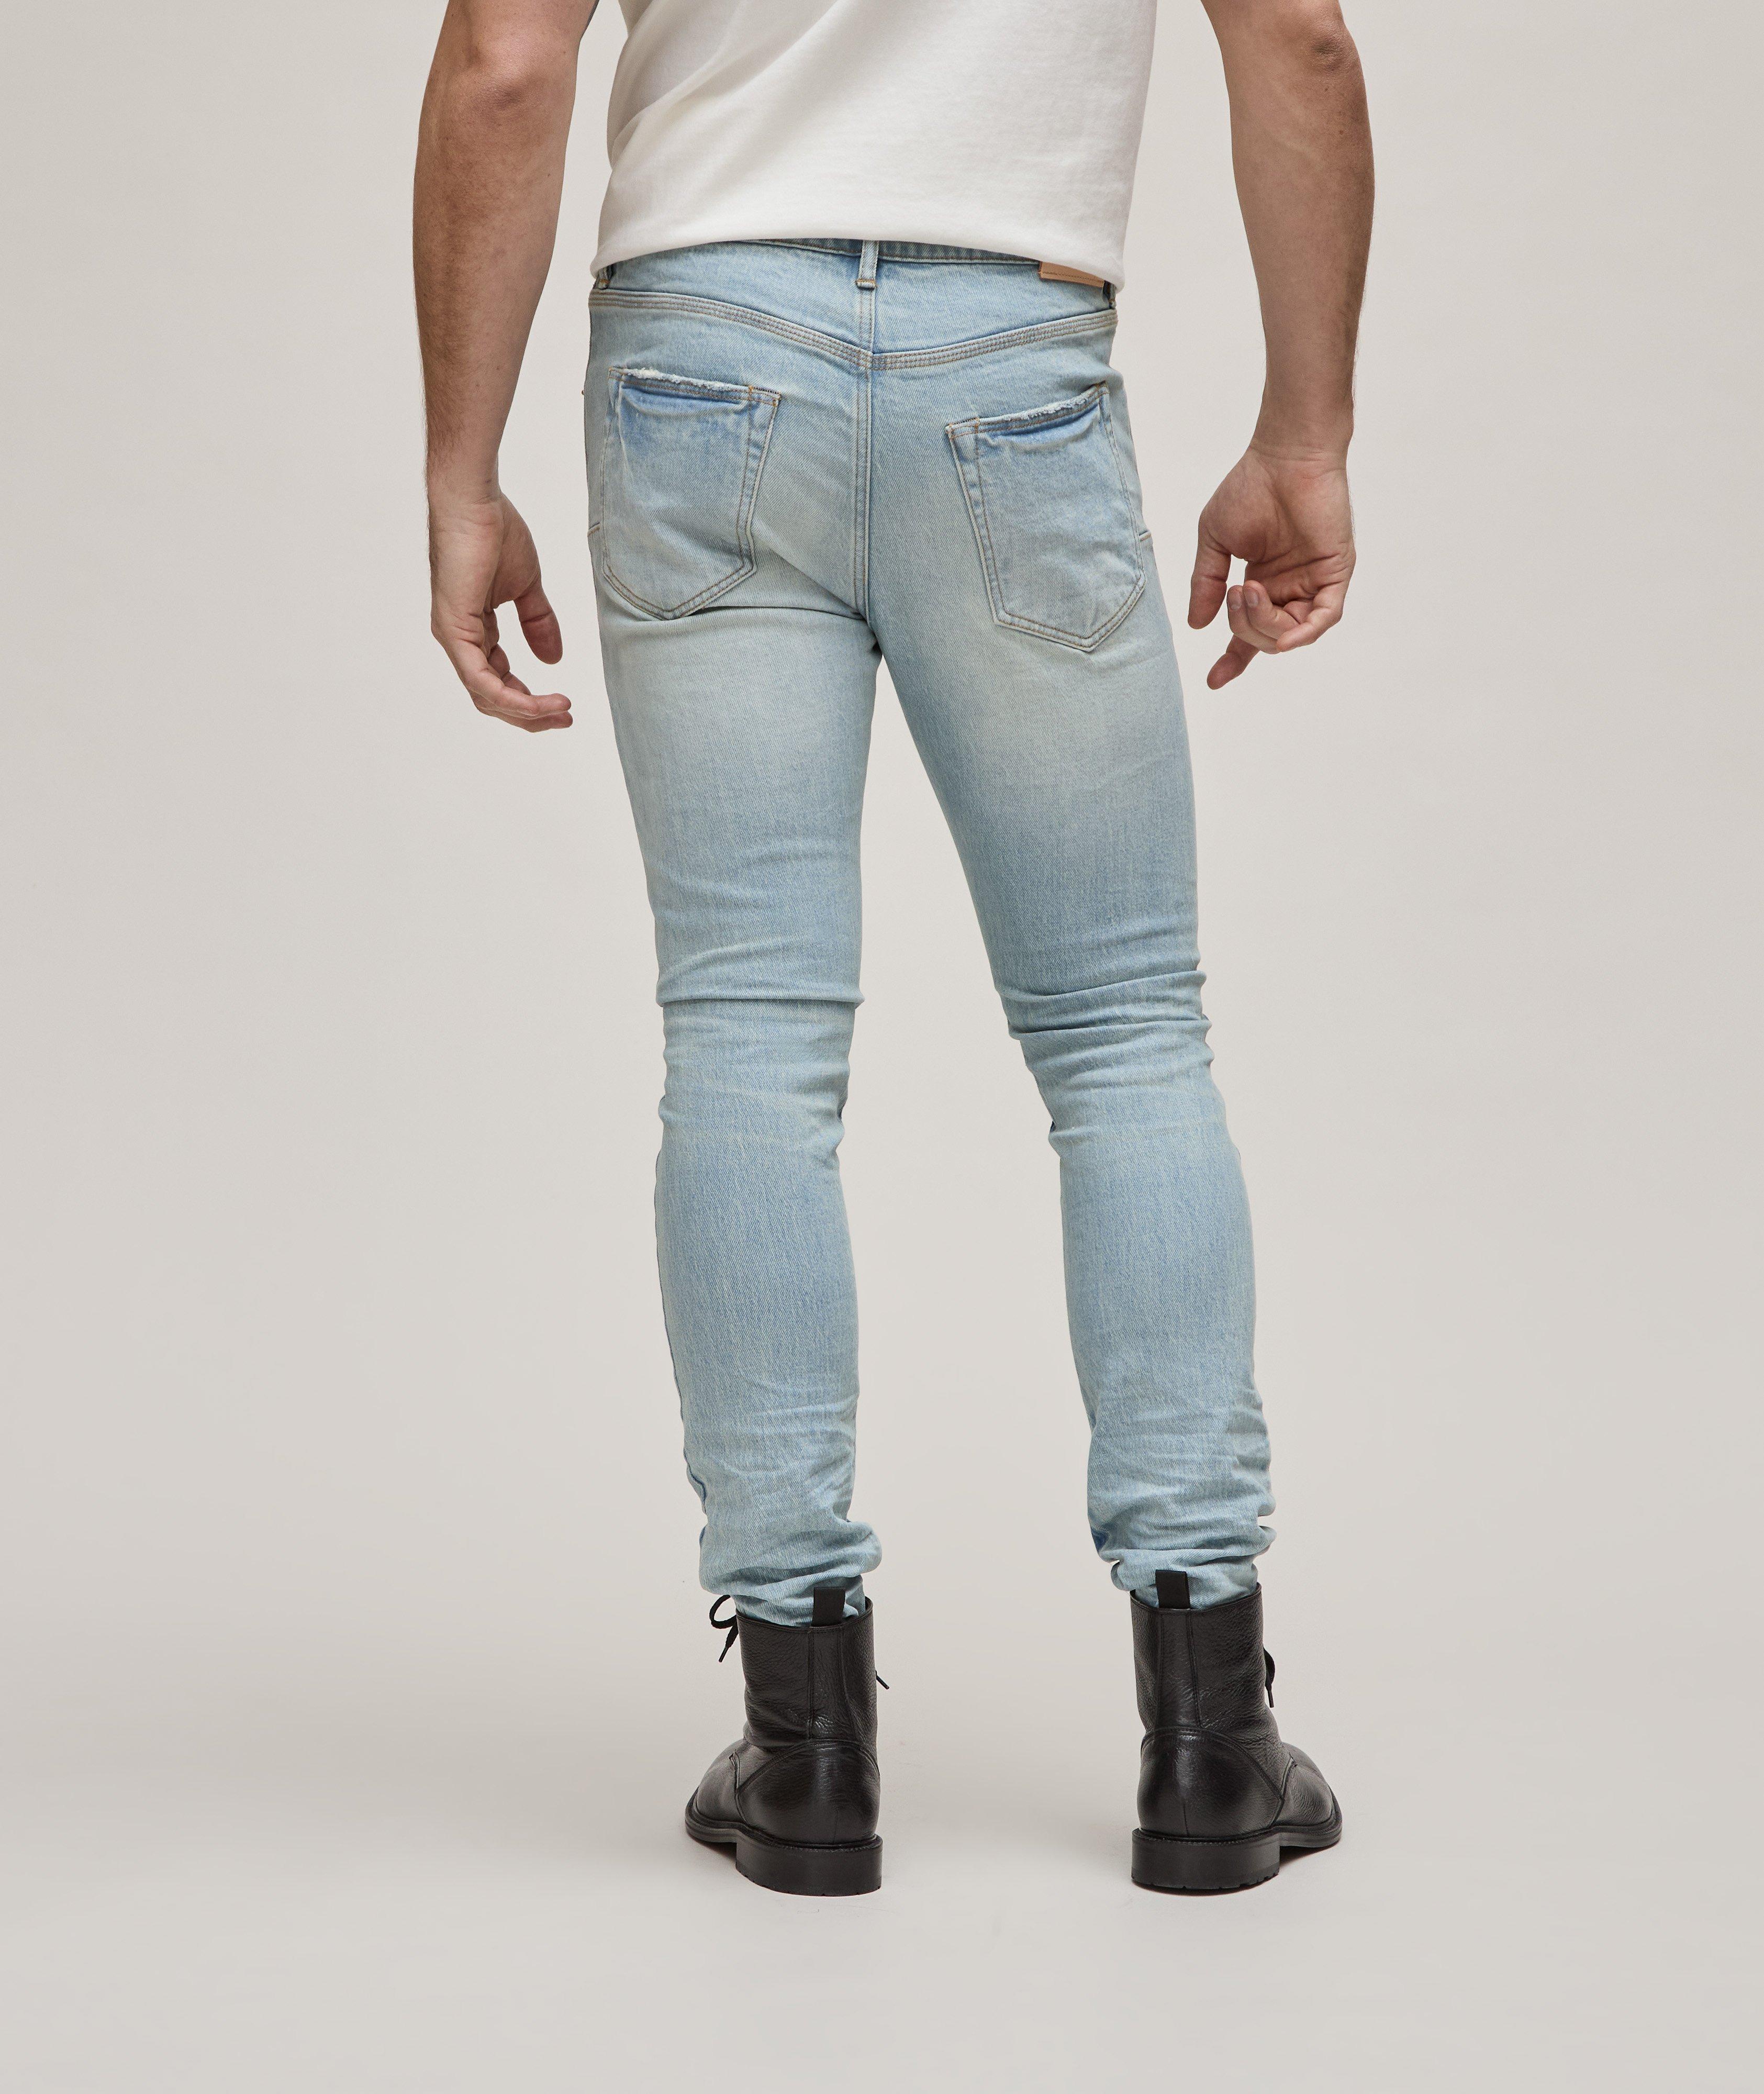 P001 Shadow Inseam Stretch-Cotton Jeans image 3